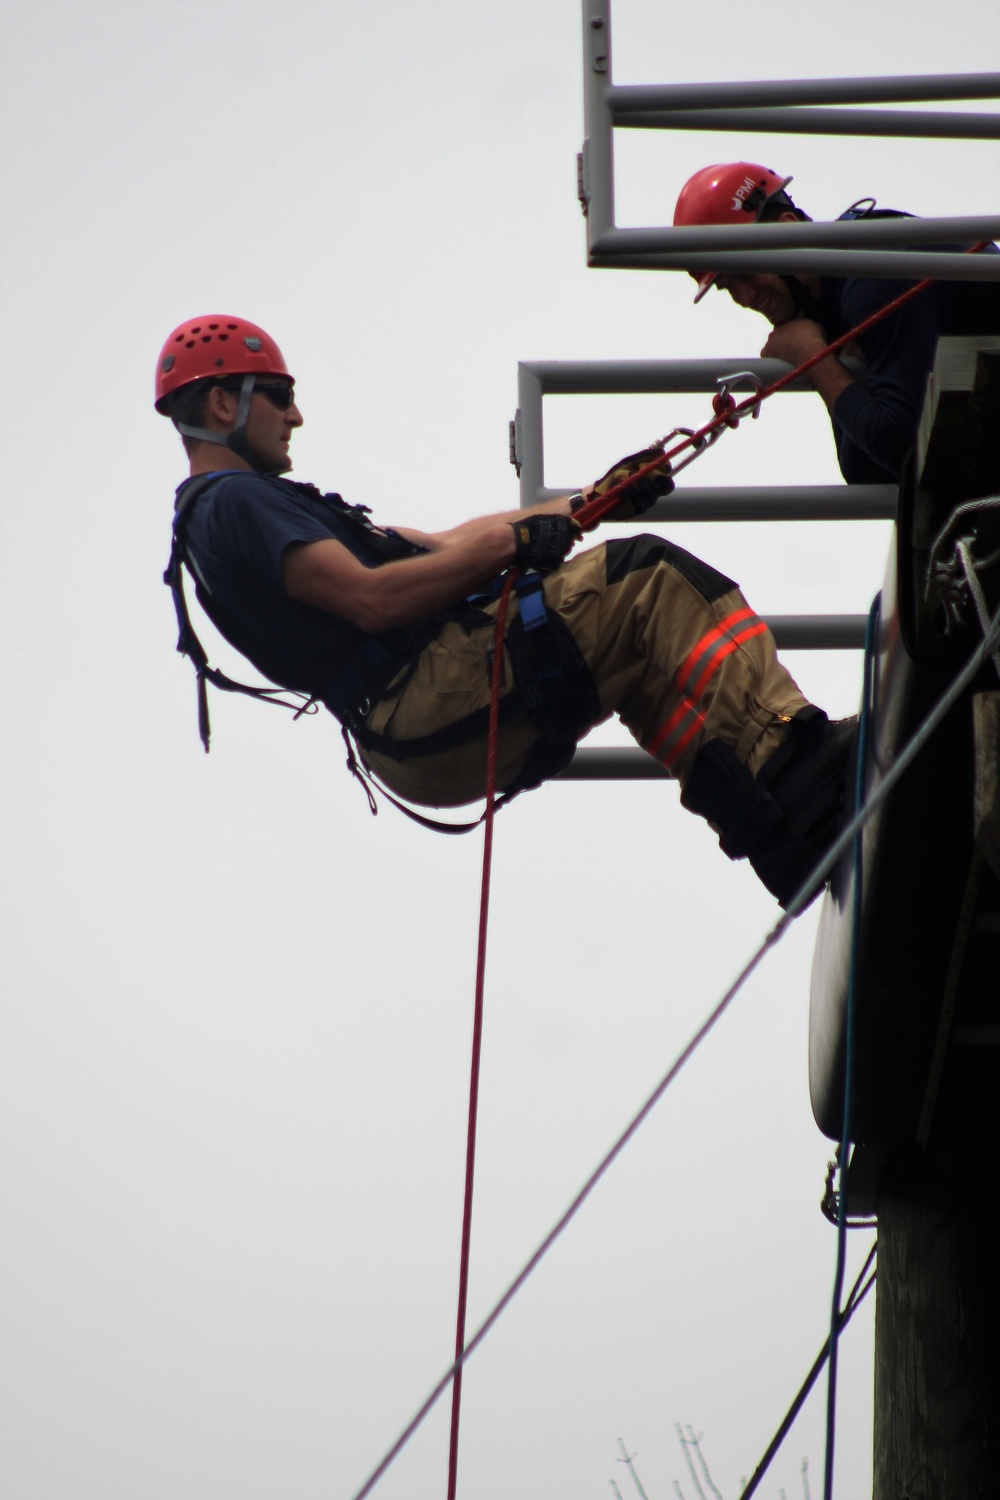 DVIDS - Images - Firefighters learn rope, rappelling skills during  technical rescue training at Fort McCoy [Image 10 of 12]